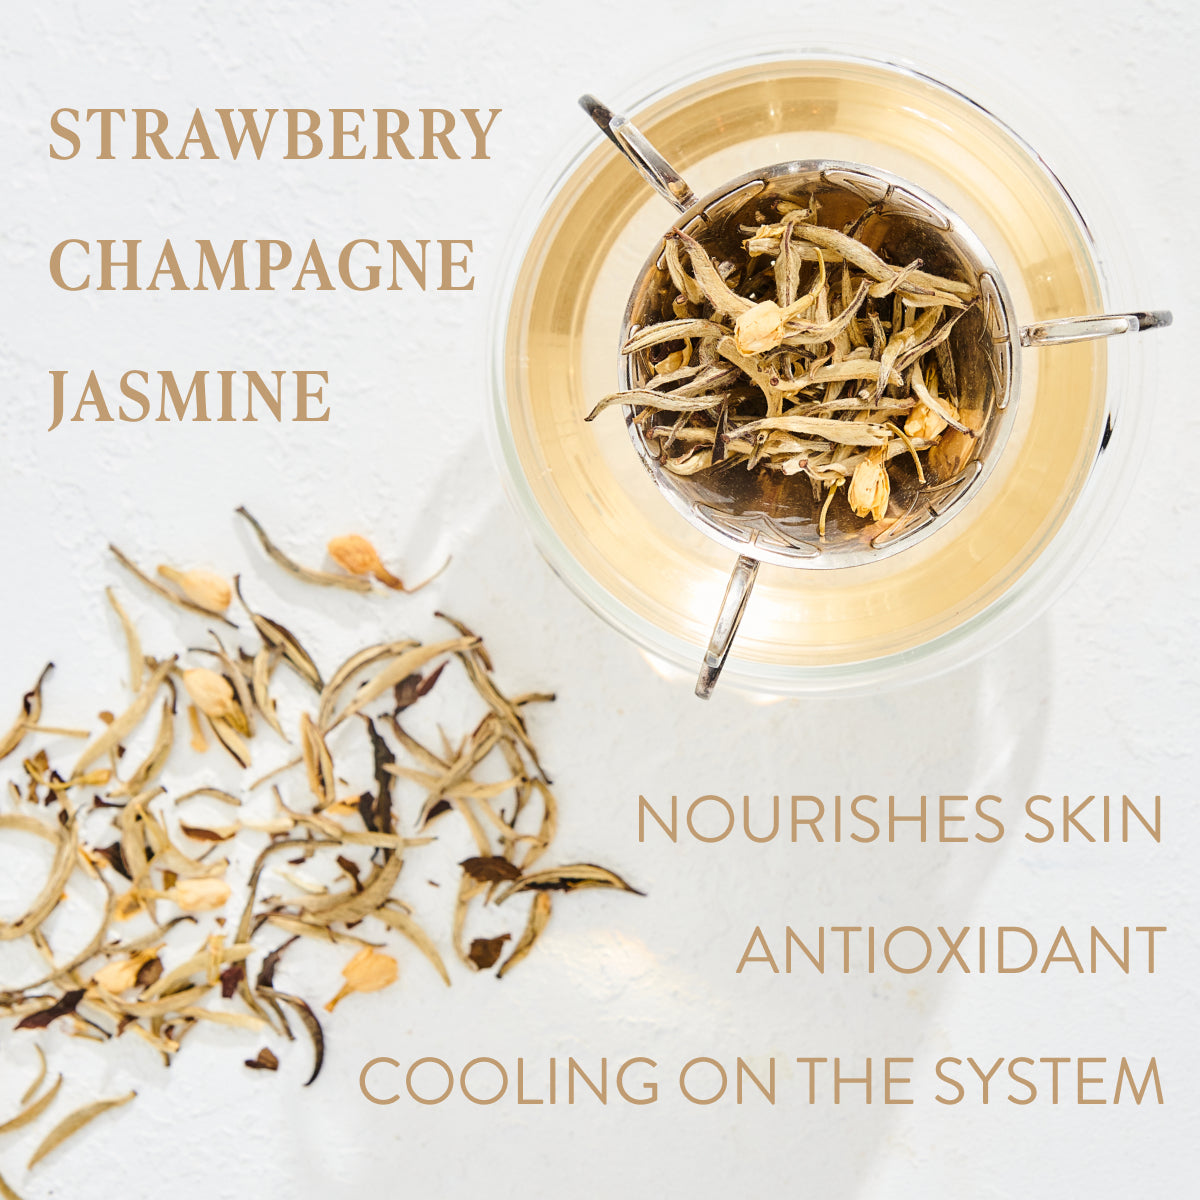 Top-down view of a glass teacup with steeped light-colored organic tea and loose leaf tea scattered around it. The words "STRAWBERRY, CHAMPAGNE, JASMINE" are on the left, while "NOURISHES SKIN, ANTIOXIDANT, COOLING ON THE SYSTEM" are on the right. Experience the Magic Hour Diamond - Champagne & Strawberry Jasmine White Tea for Beautiful Skin moment.